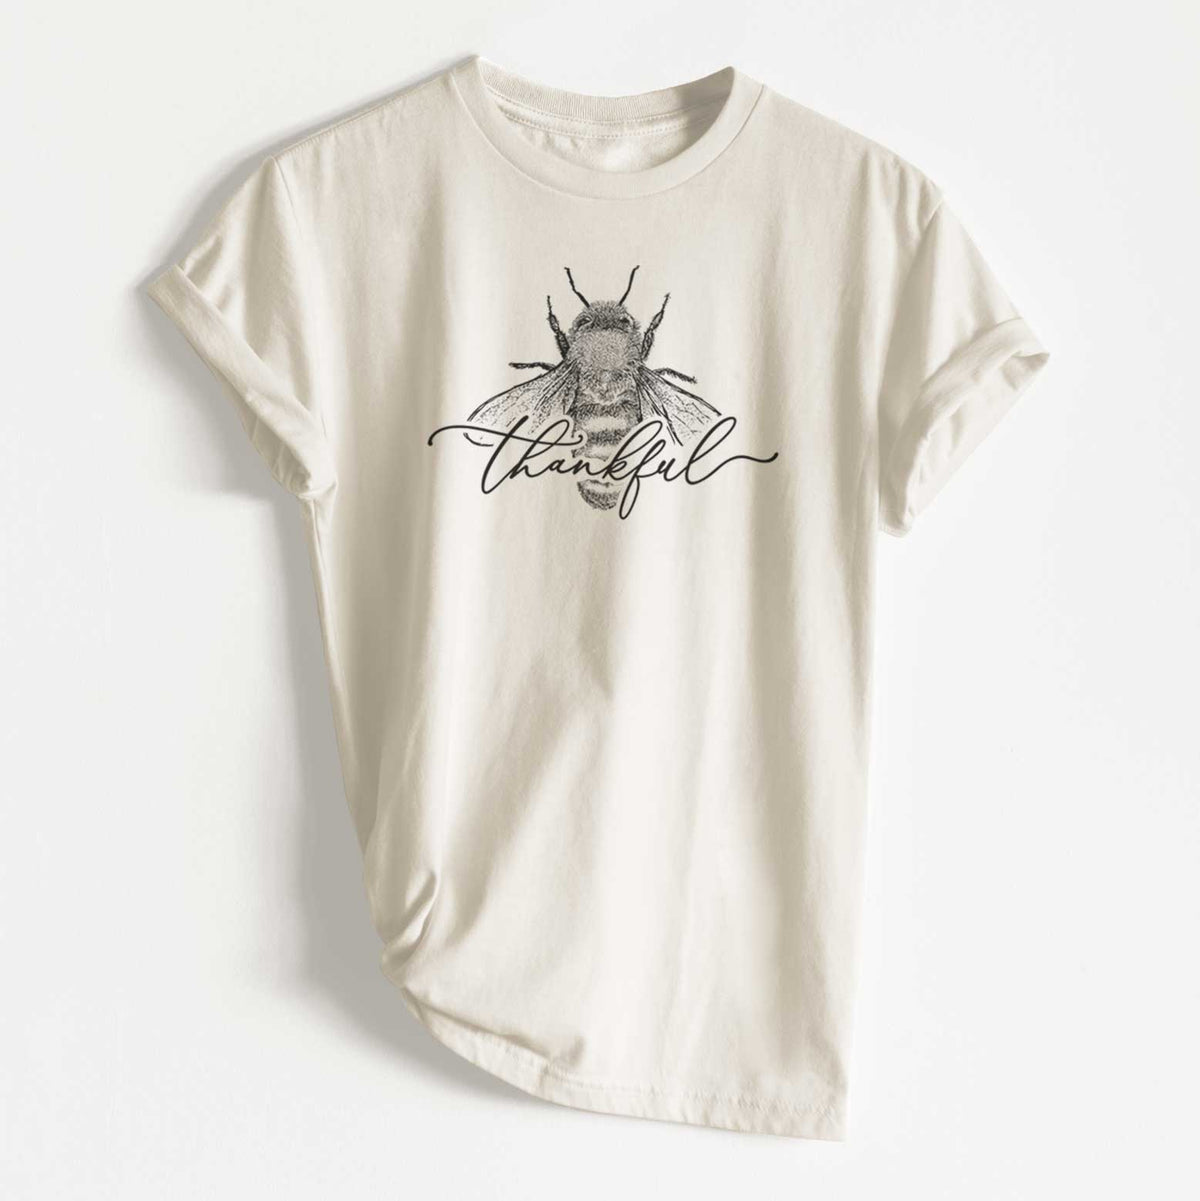 Bee Thankful - Unisex Recycled Eco Tee  - CLOSEOUT - FINAL SALE